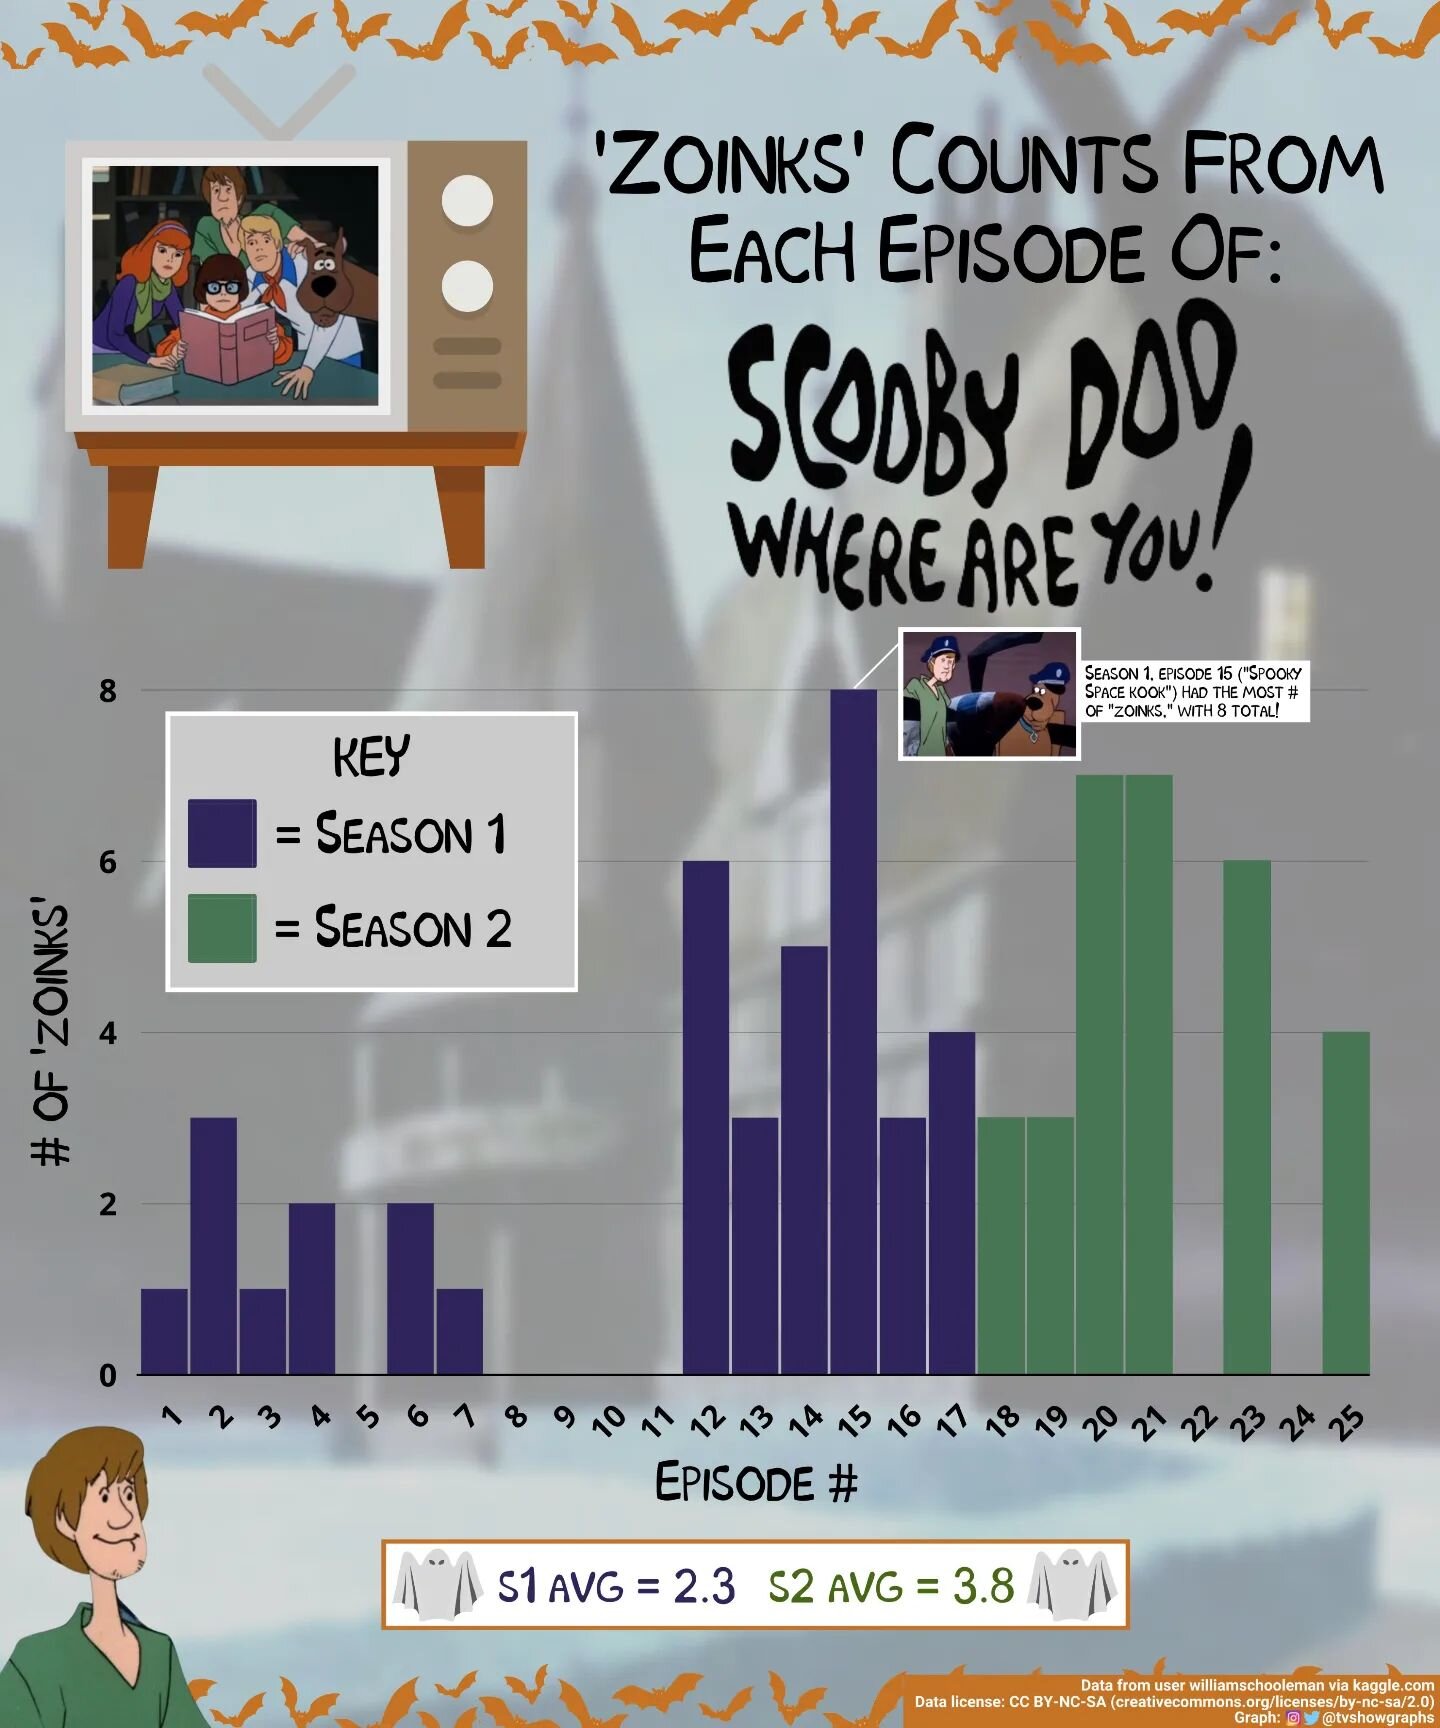 Breaking up the work week with a completely fun and random look at how many times per episode &quot;Zoinks!&quot; was exclaimed on the original 'Scooby Doo, Where Are You?' cartoon television series.

Interestingly, the &quot;Zoinks&quot; counts star